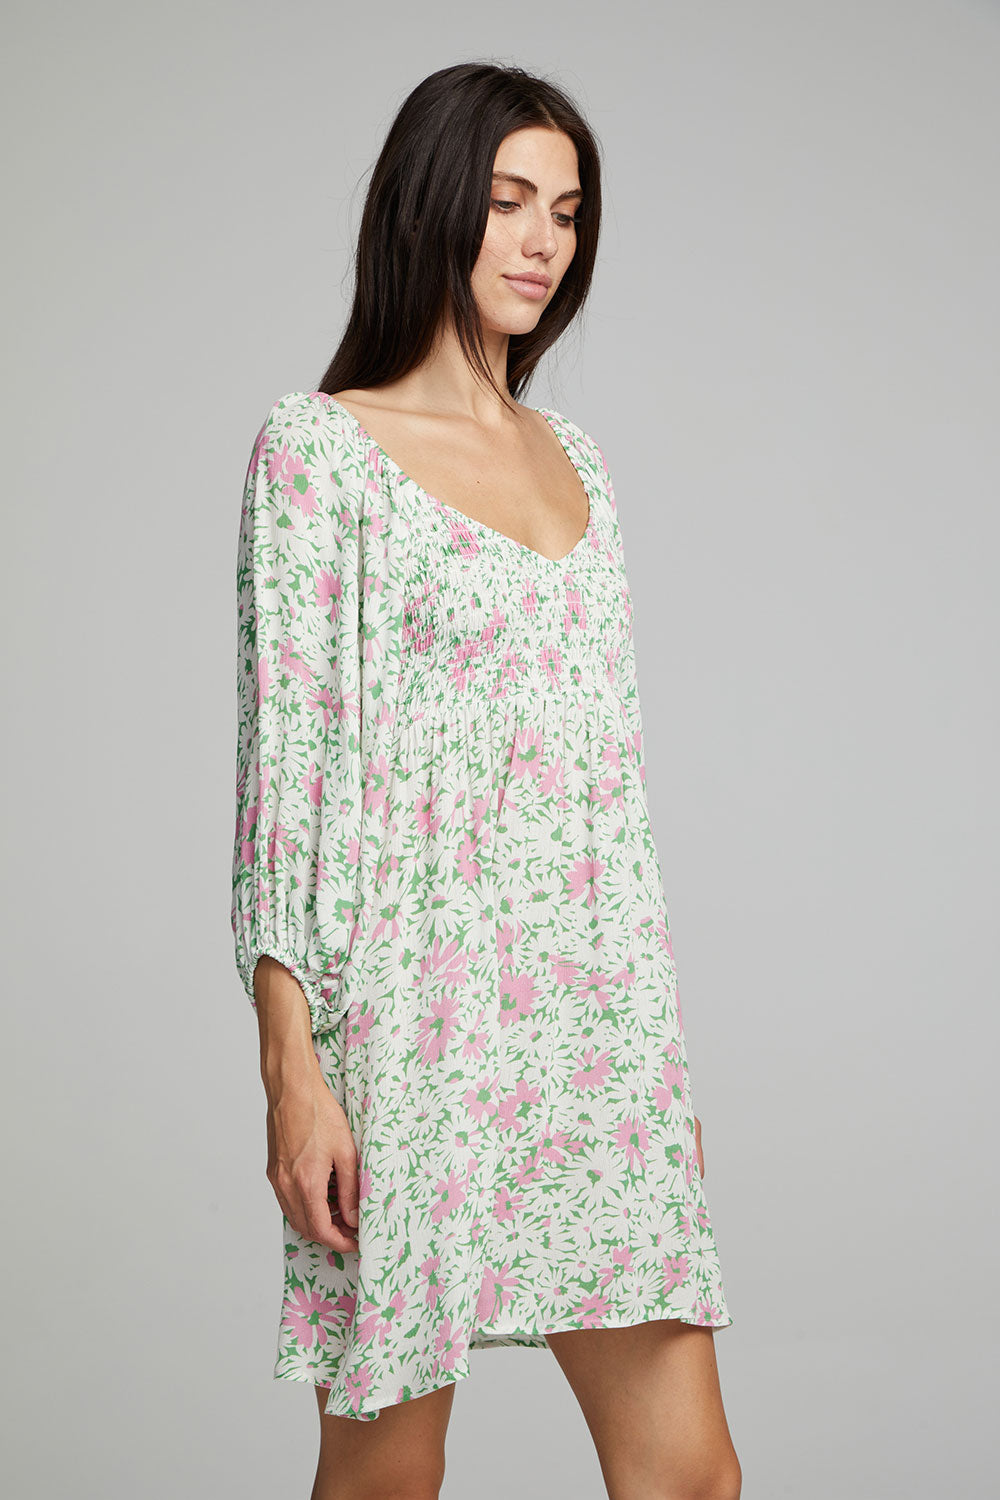 Dolce Mini Dress - Daisy Floral Print WOMENS chaserbrand